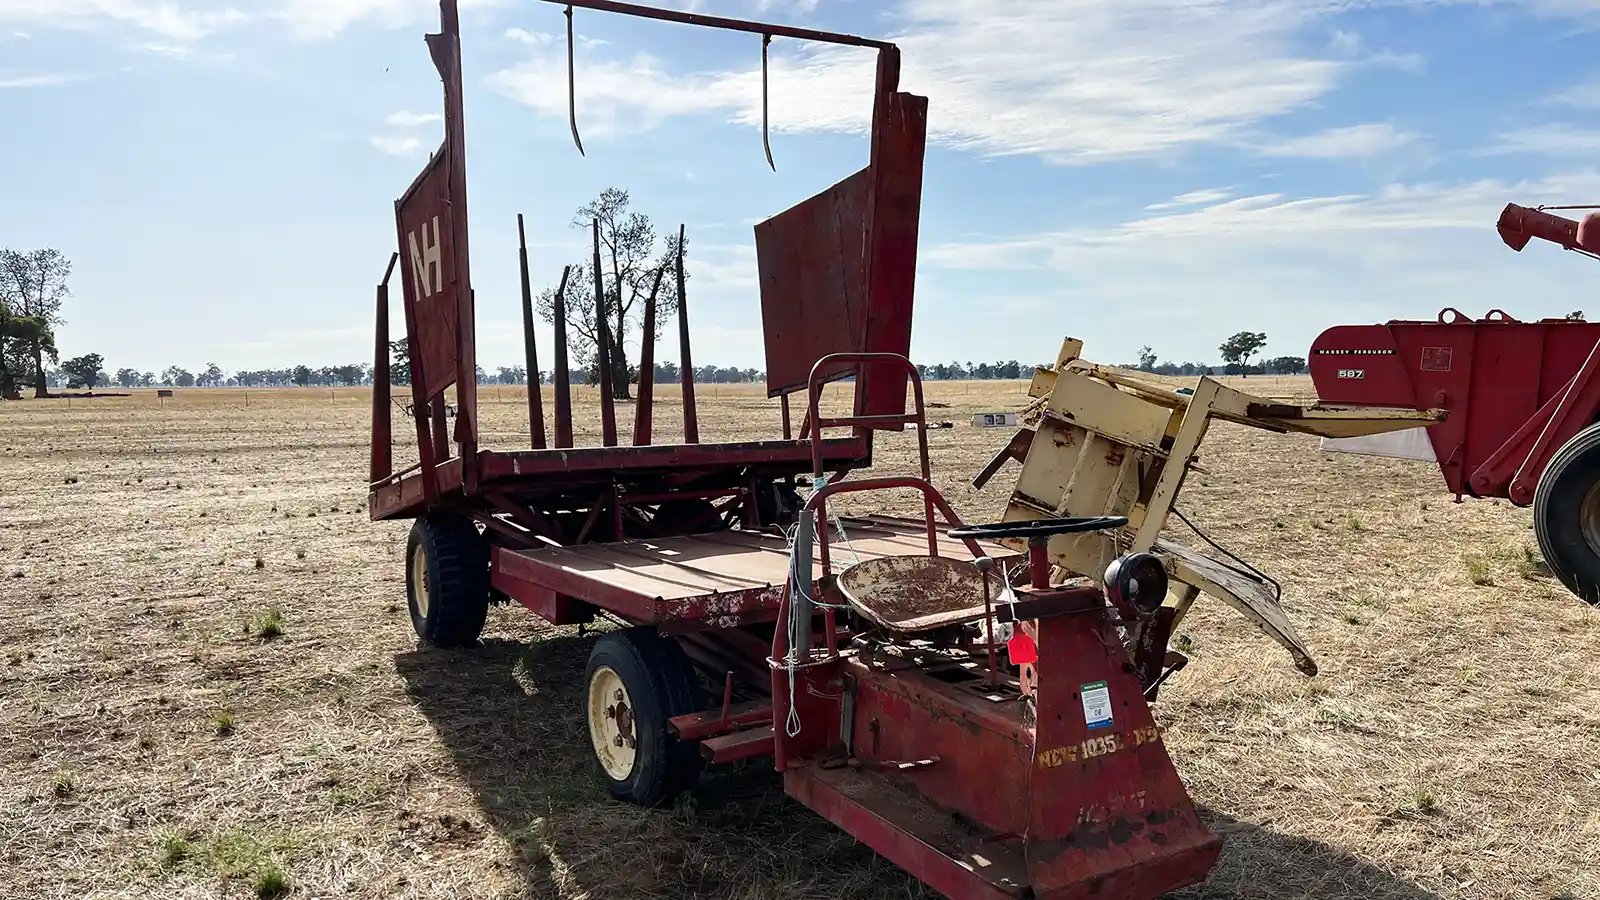 Self-propelled hay bale loader in a clearing sale